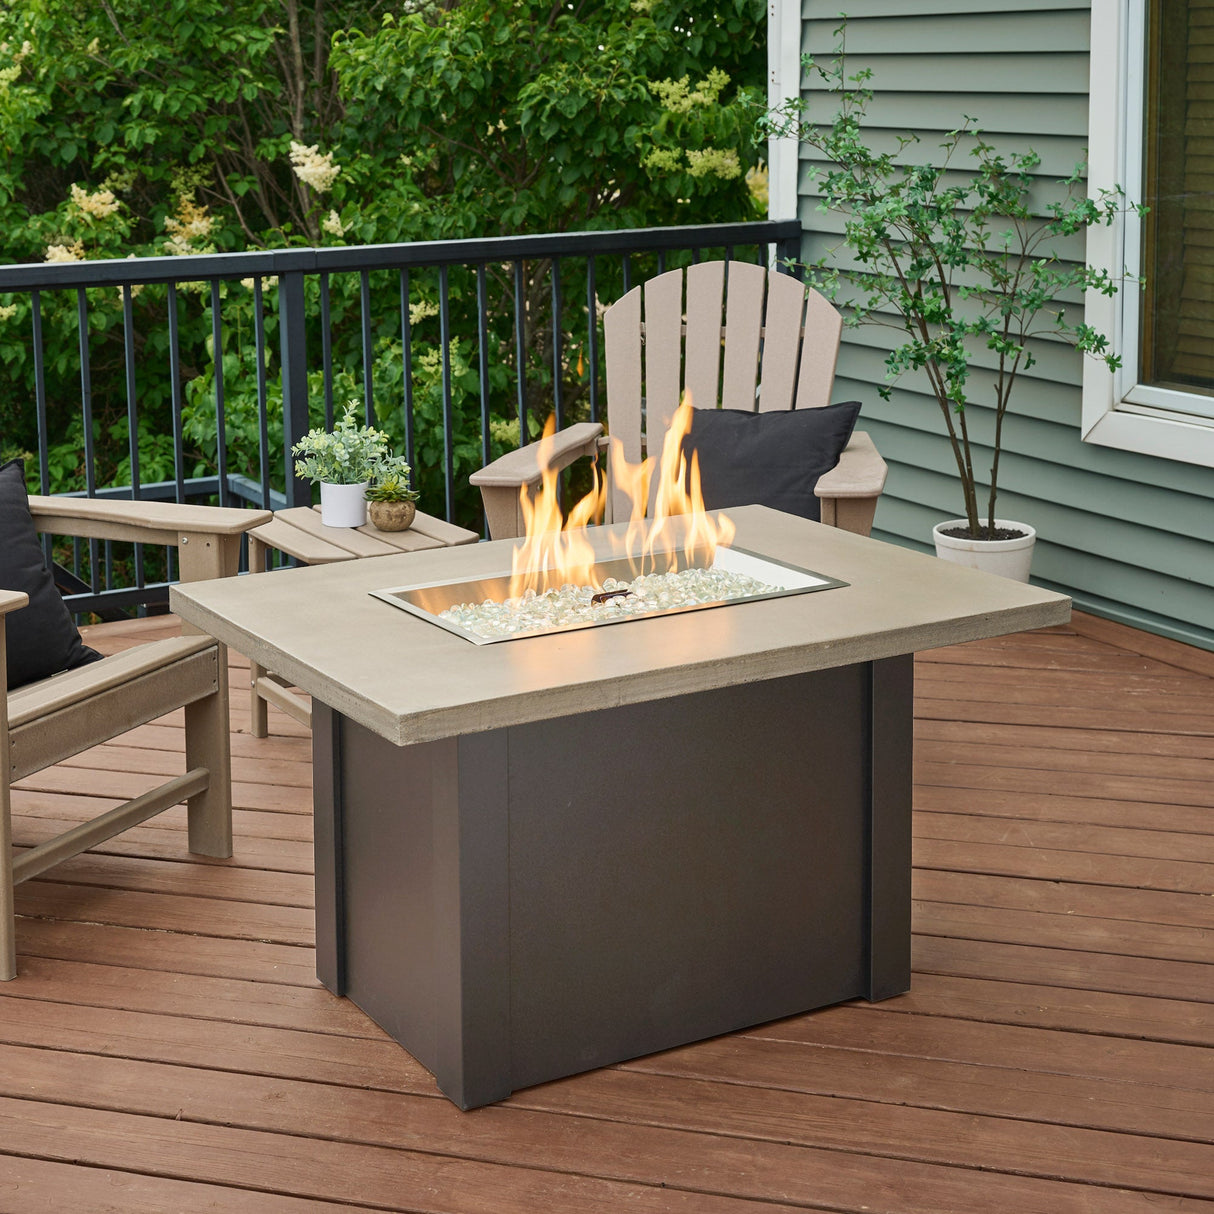 A patio setup that features a Havenwood Rectangular Gas Fire Pit Table with a Pebble Grey top and Graphite Grey base with a large flame